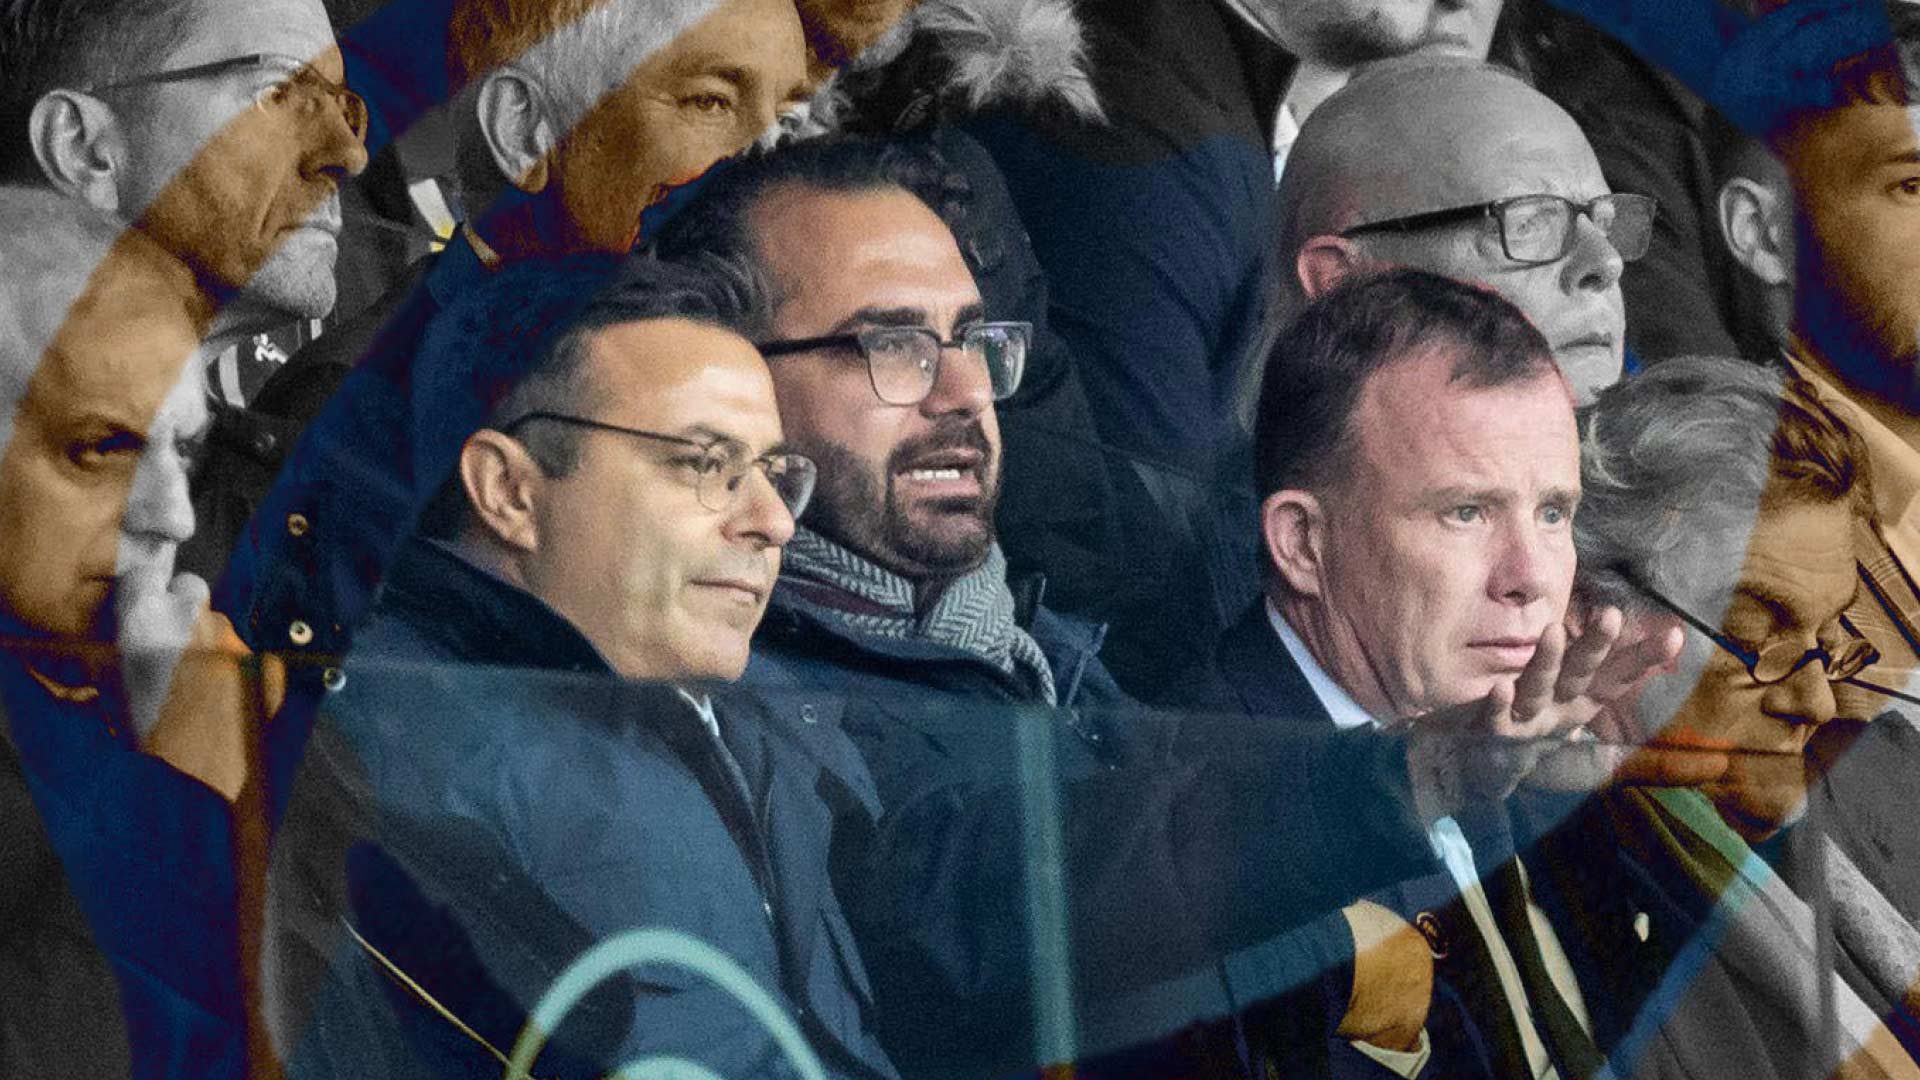 Andrea Radrizzani, Victor Orta, and Angus Kinnear sitting in the posh seats at Elland Road, wondering why everyone else is making mistakes